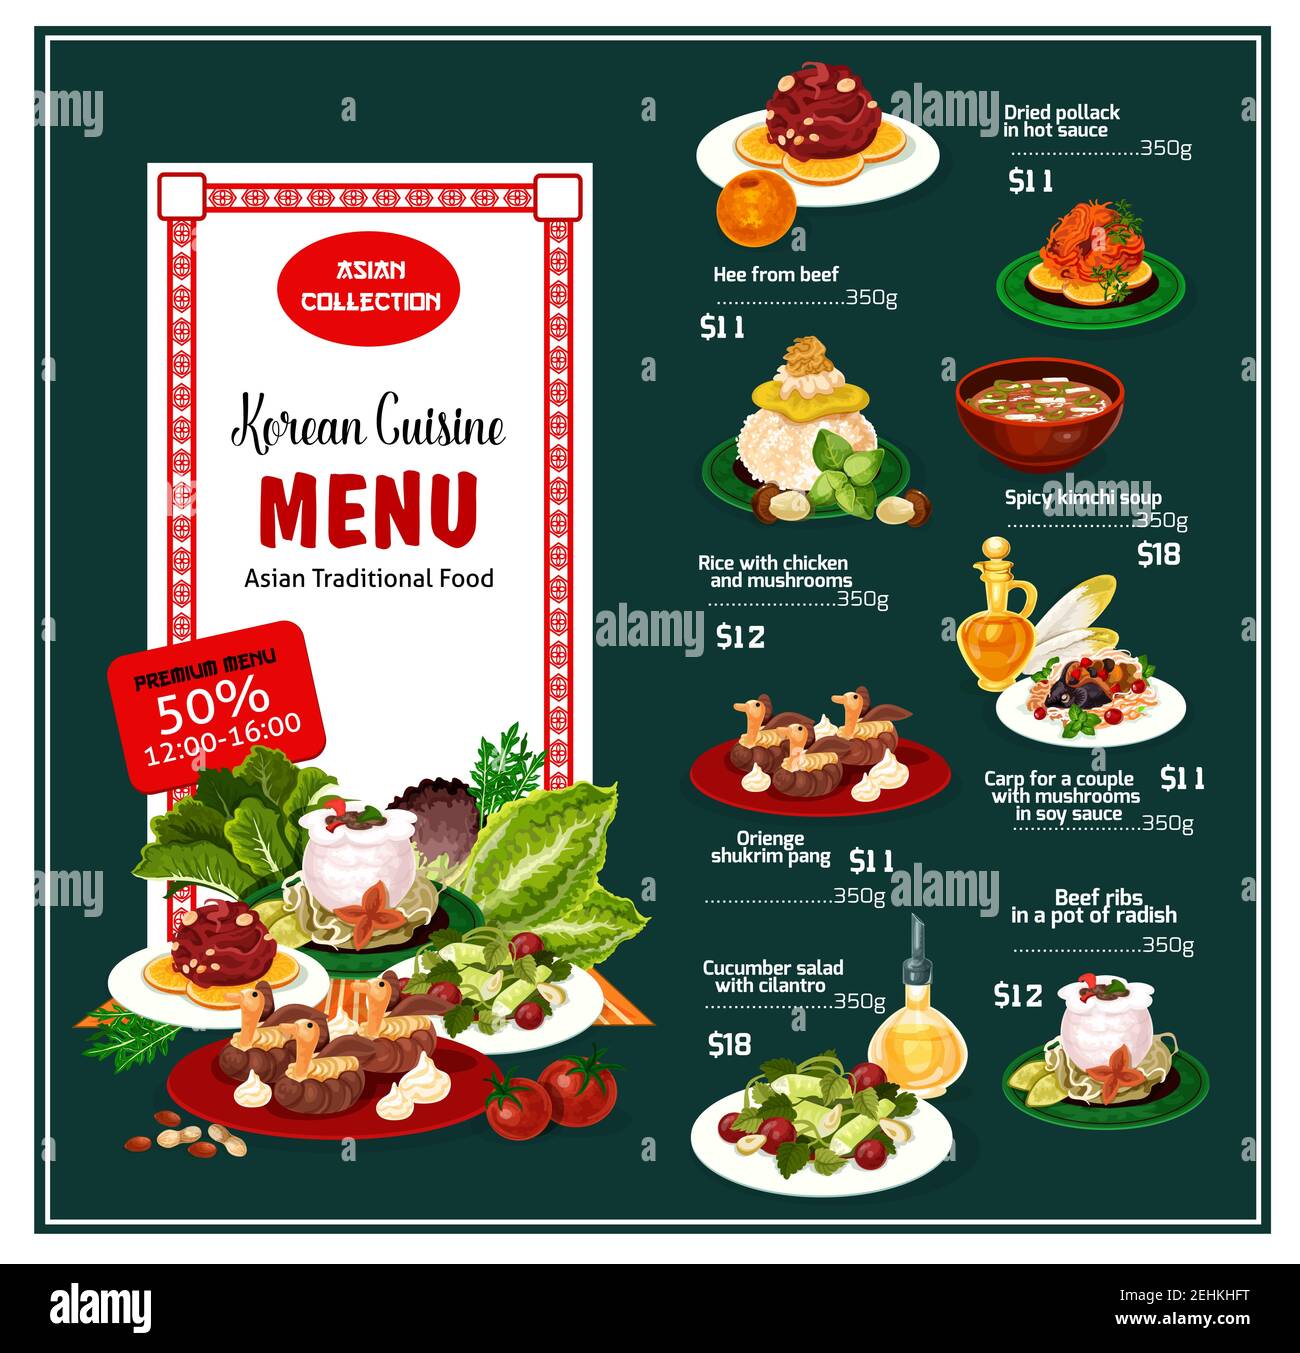 Korean cuisine asian traditional food menu dishes list and prices. Hee from beef and dried pollack in sauce, rice with chicken, kimchi soup and orieng Stock Vector